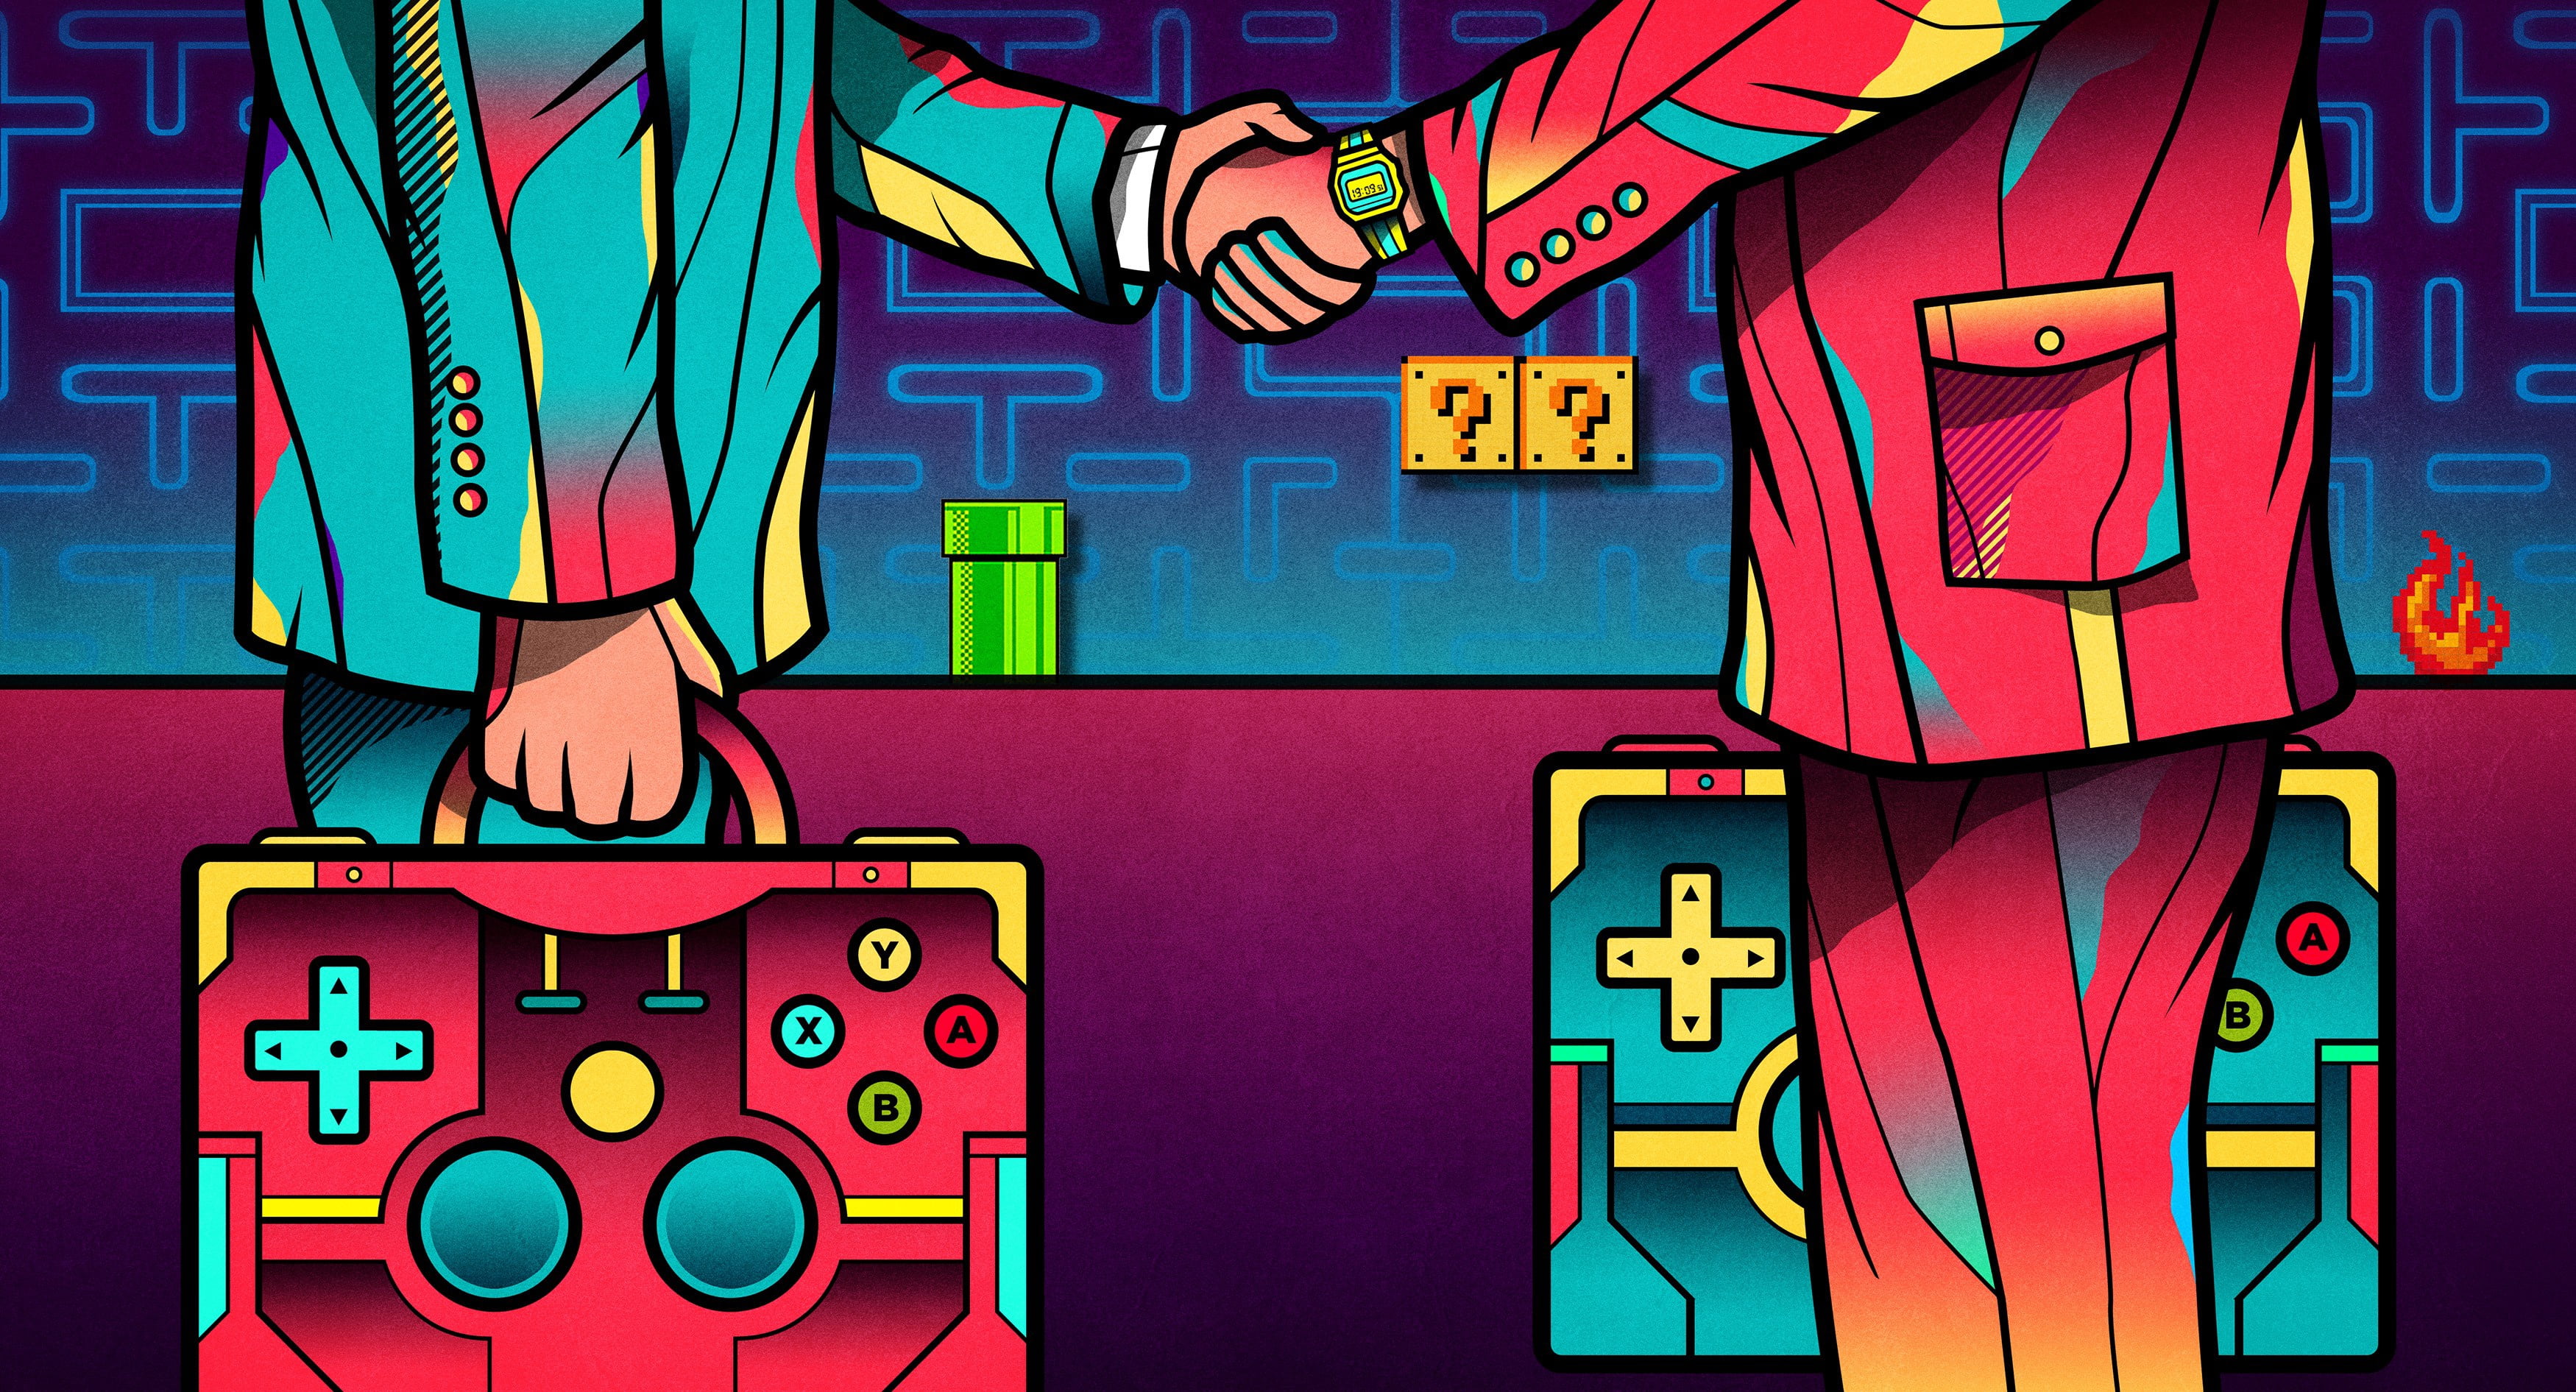 Color, Game, The game, People, Style, Mario, Art, Games, Joystick